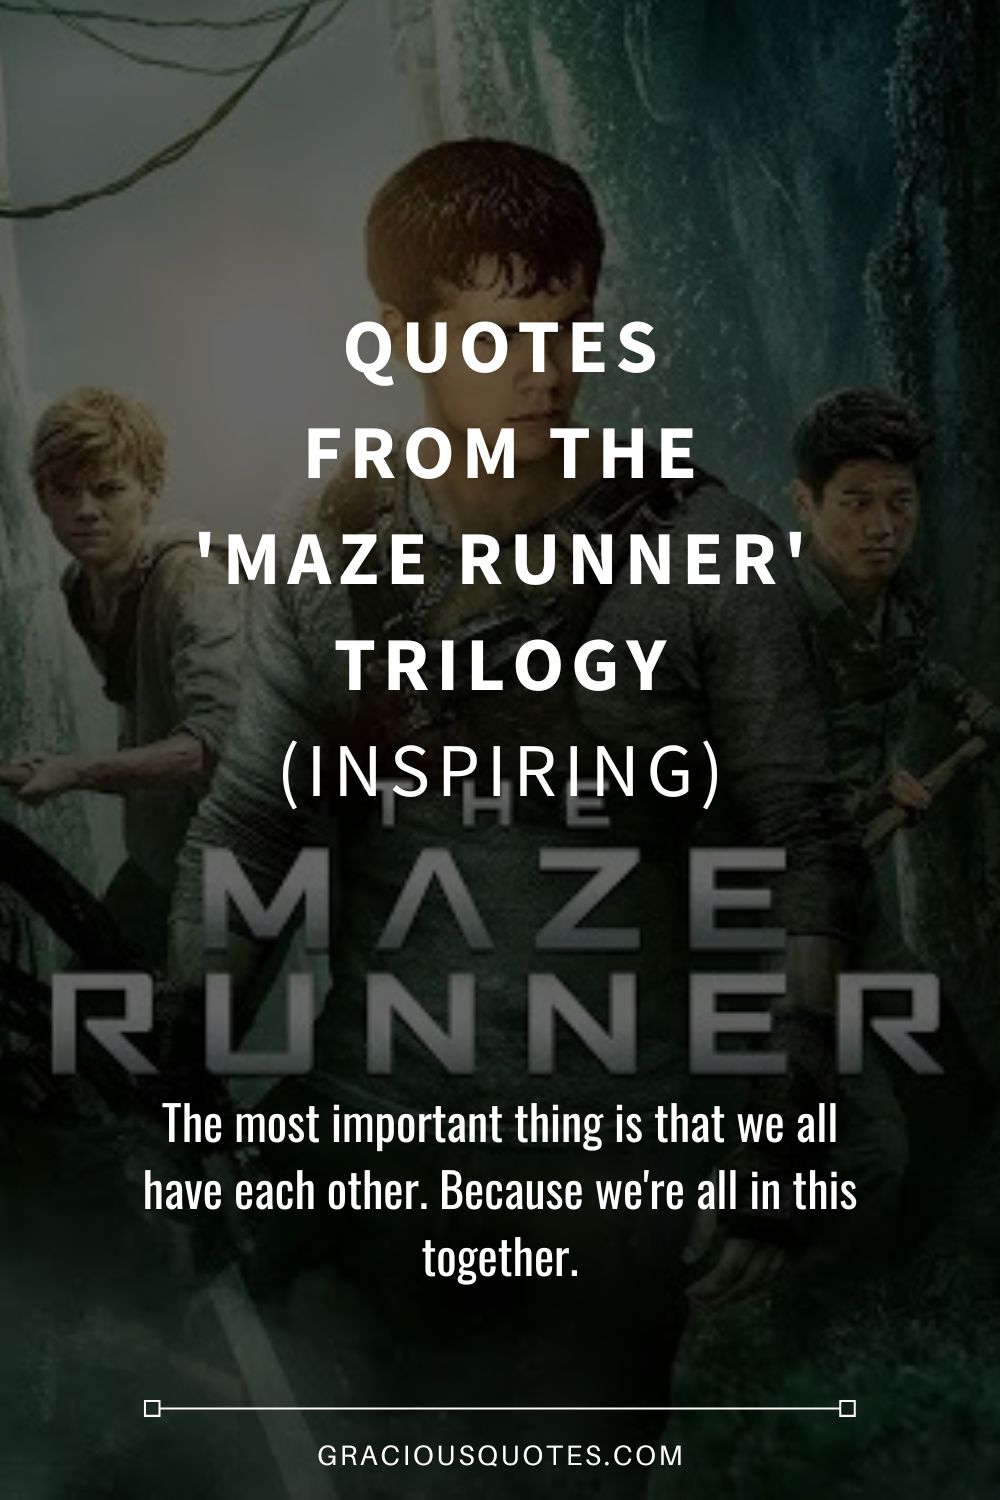 Quotes from the 'Maze Runner' Trilogy (INSPIRING) - Gracious Quotes